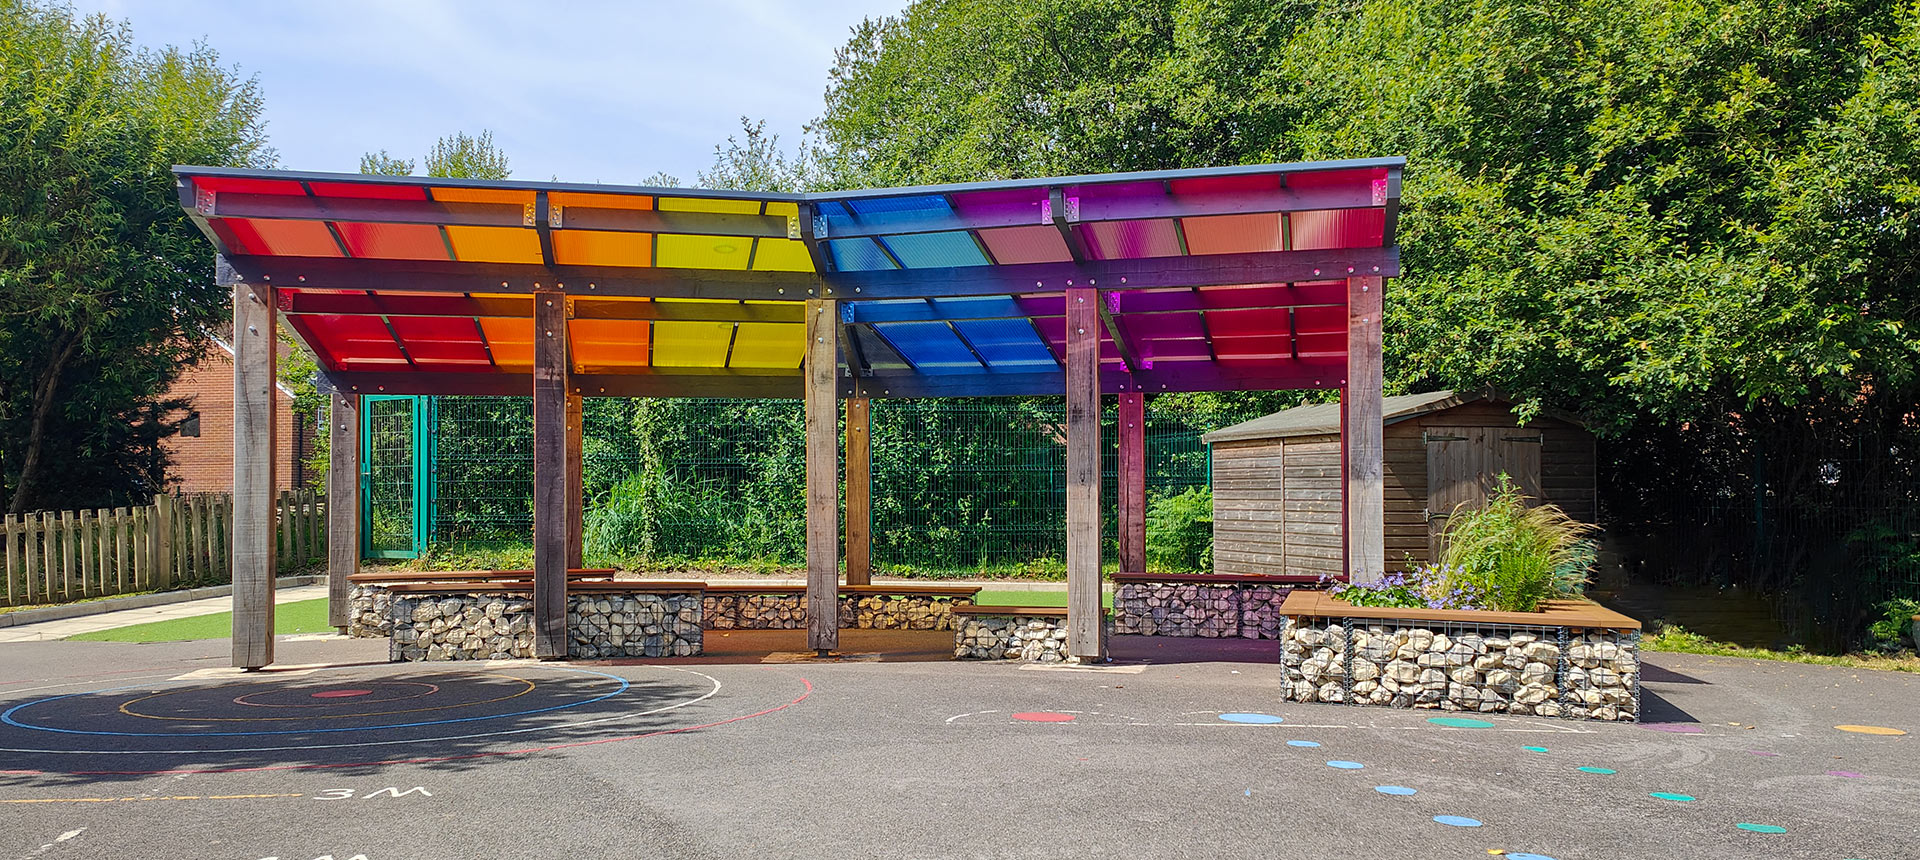 front view of shelter in school playground with multicolored roof